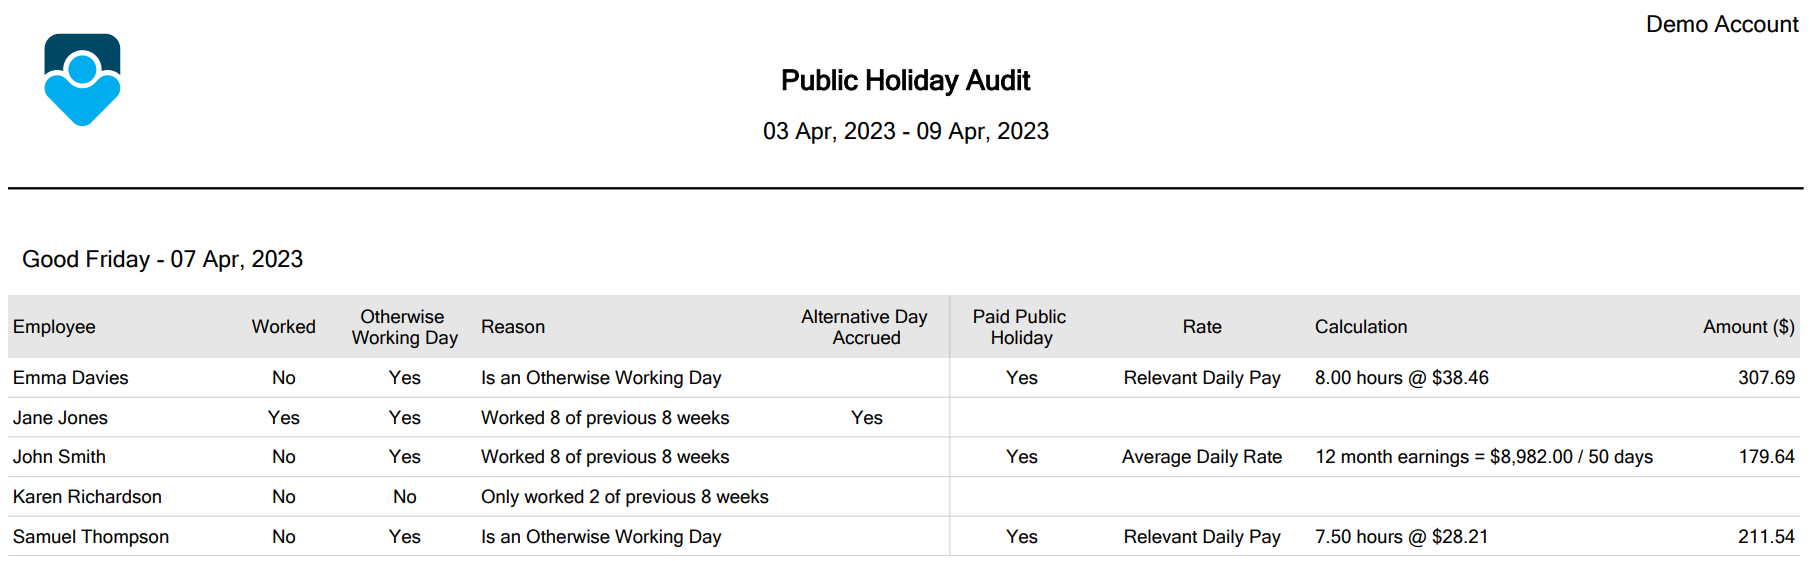 Alternative_Leave_-_Public_Holiday_Audit_Report.png